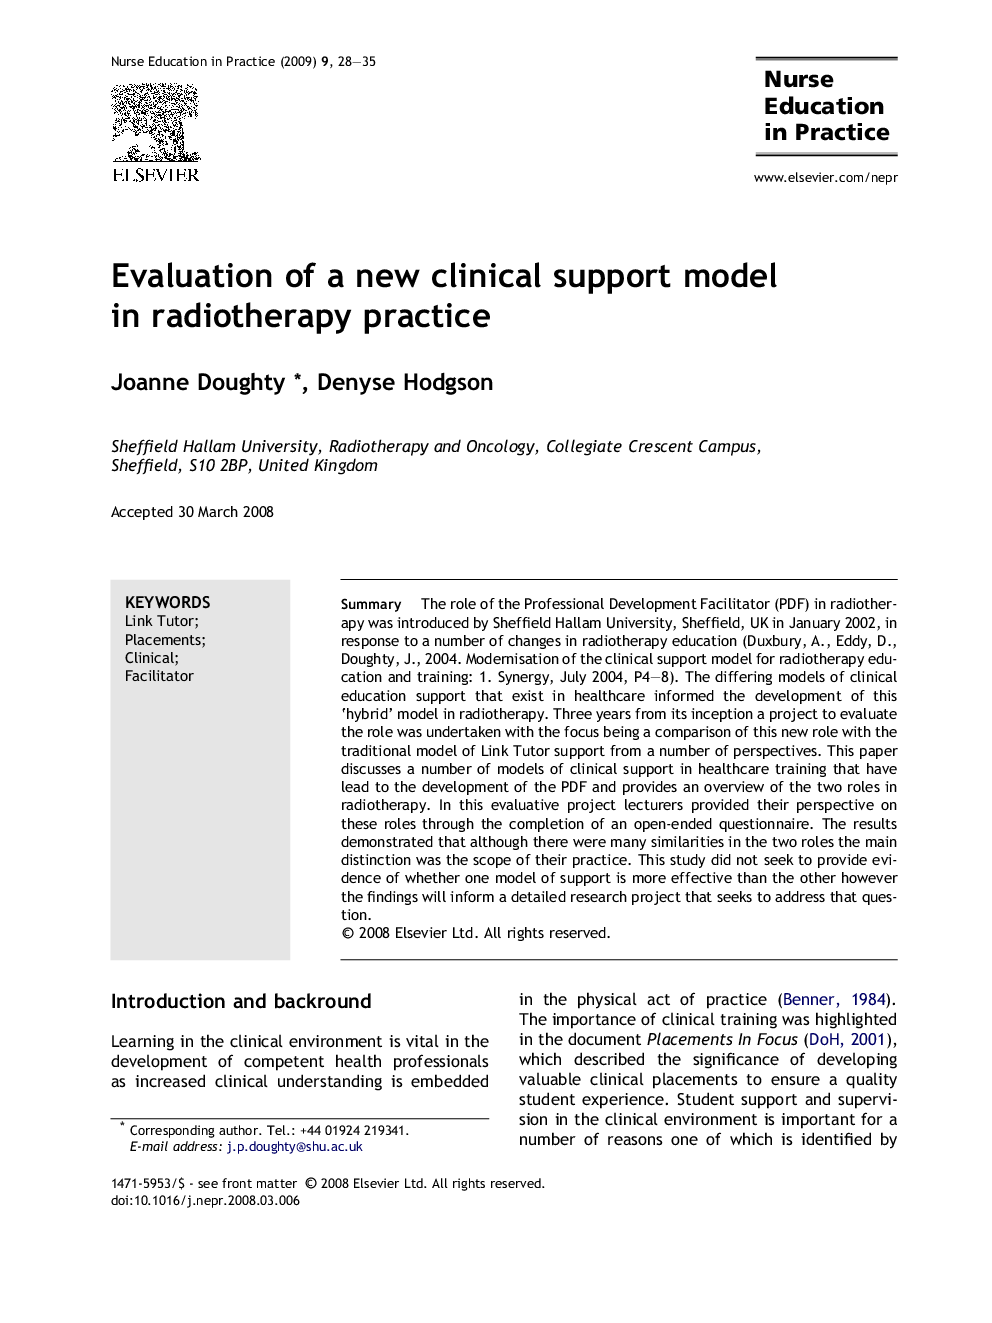 Evaluation of a new clinical support model in radiotherapy practice